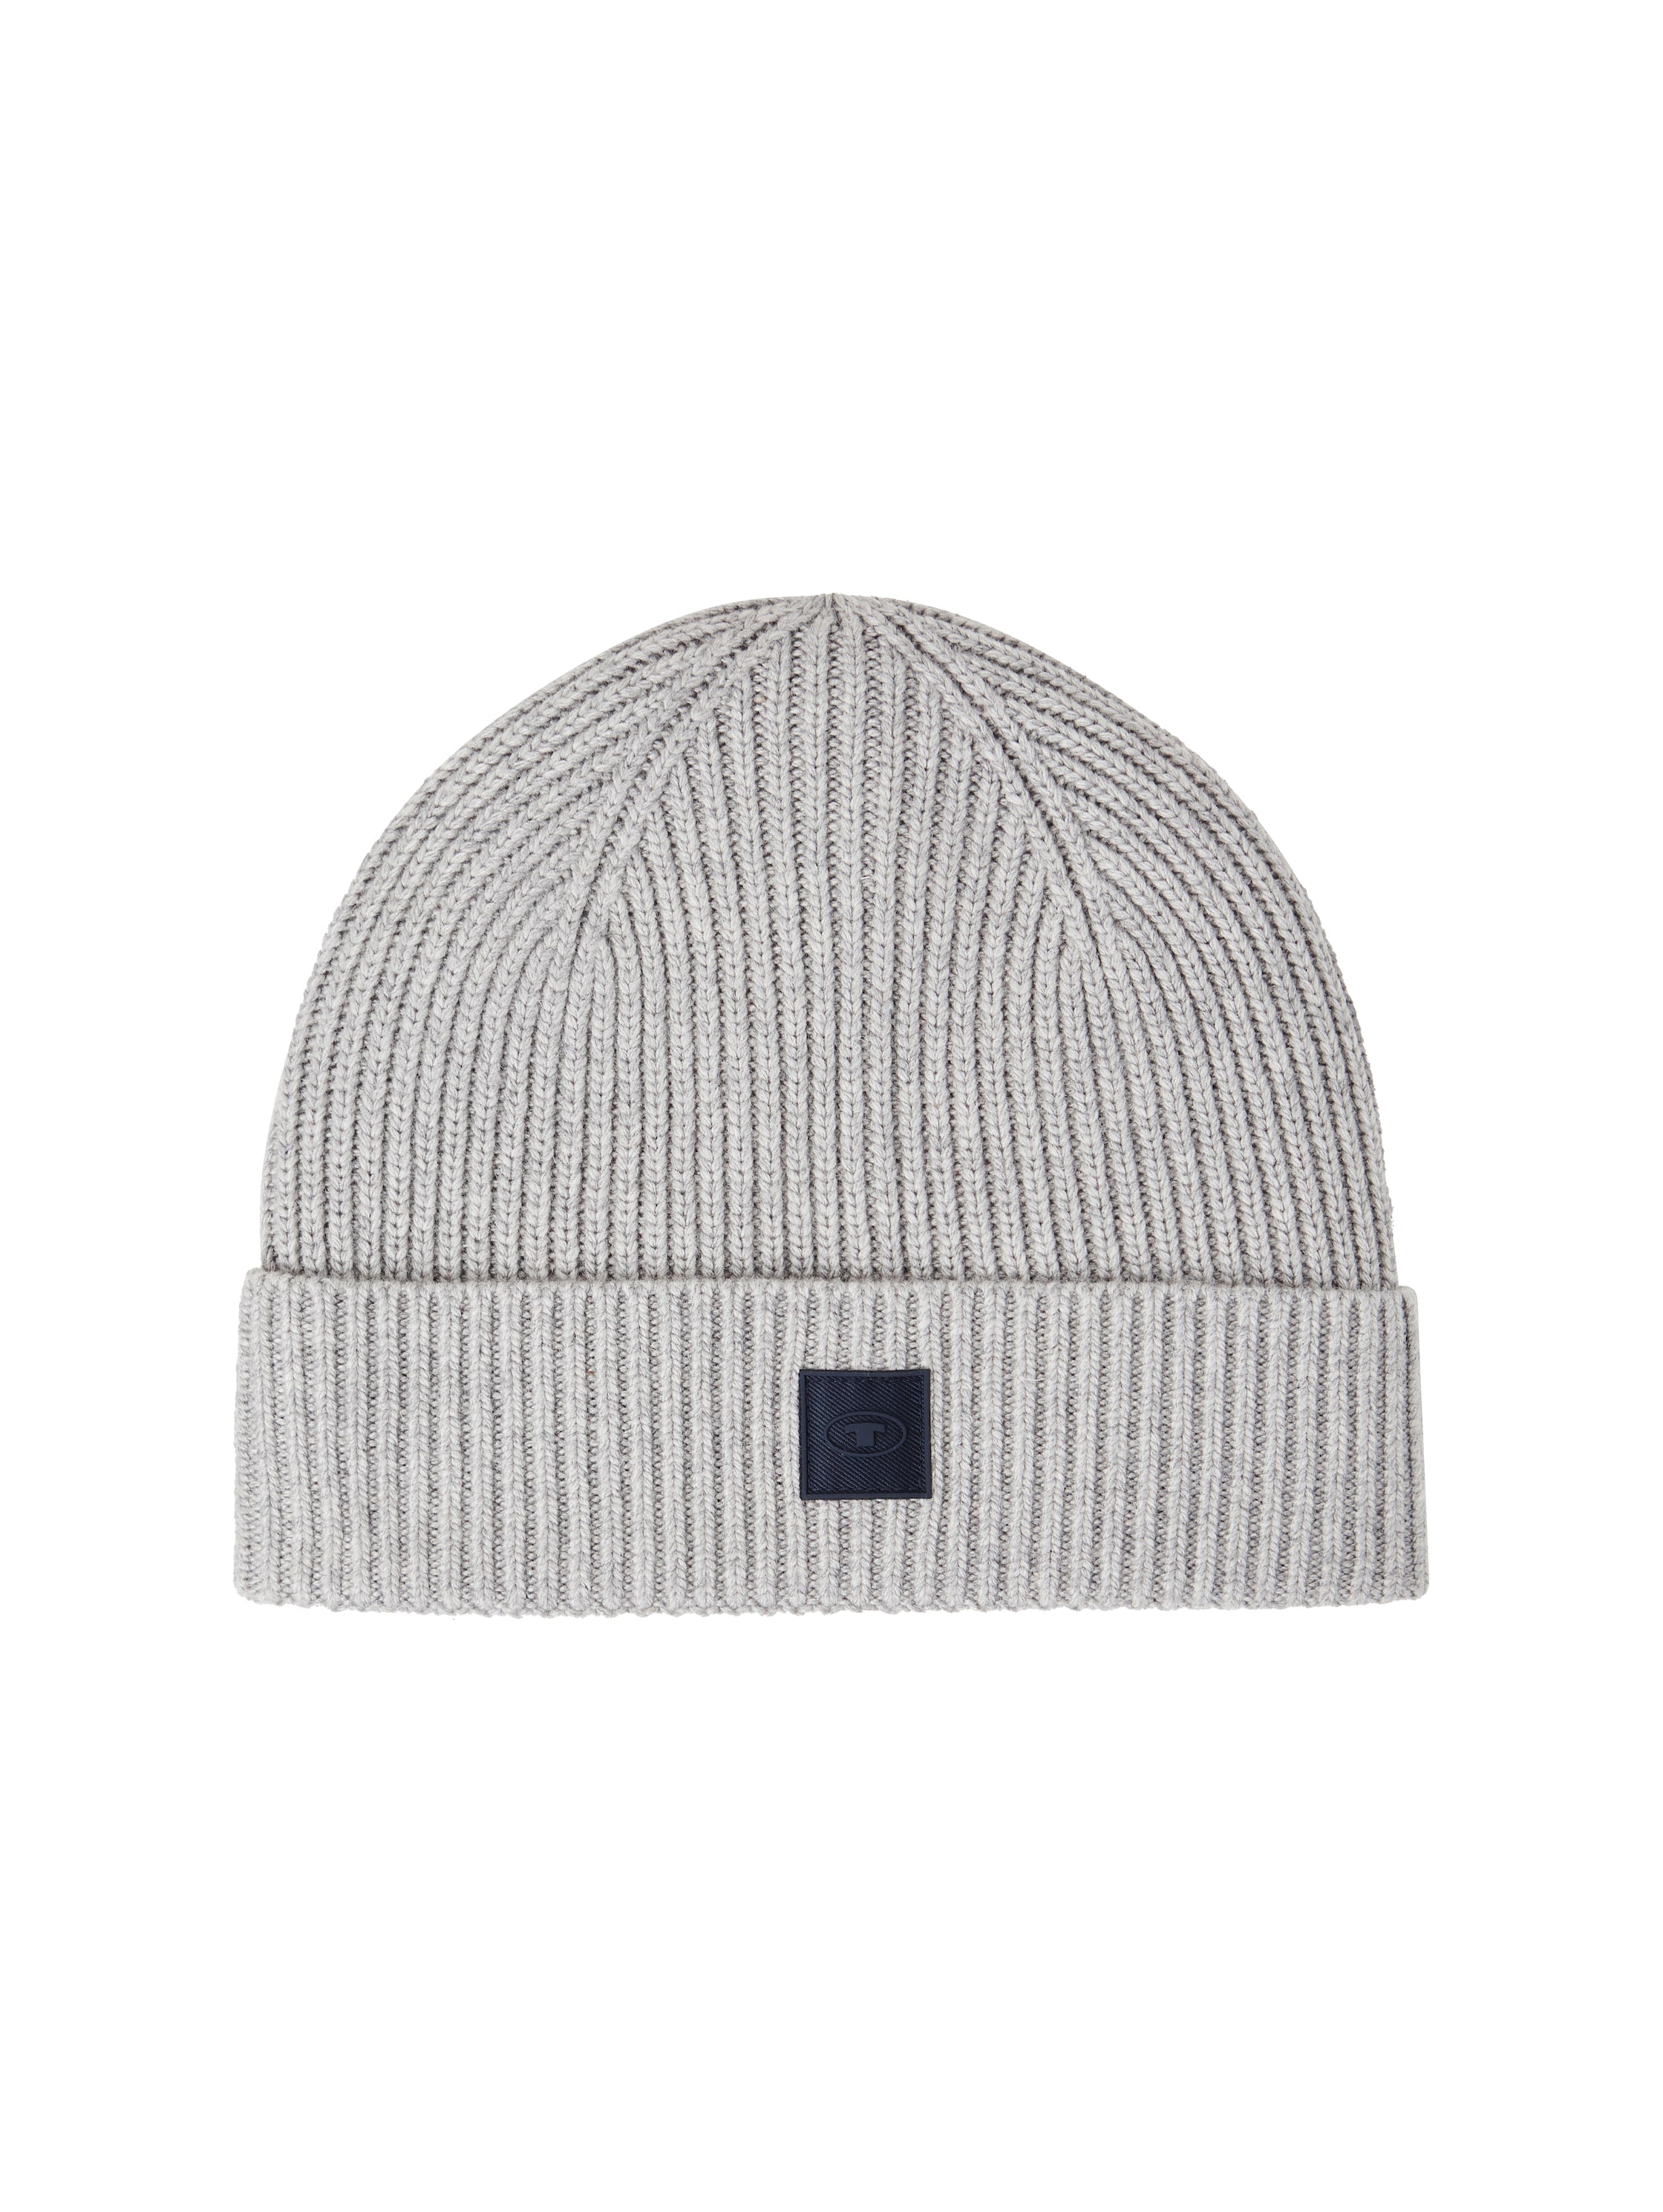 Tom Tailor Ribbed Grey Knitted Beanie